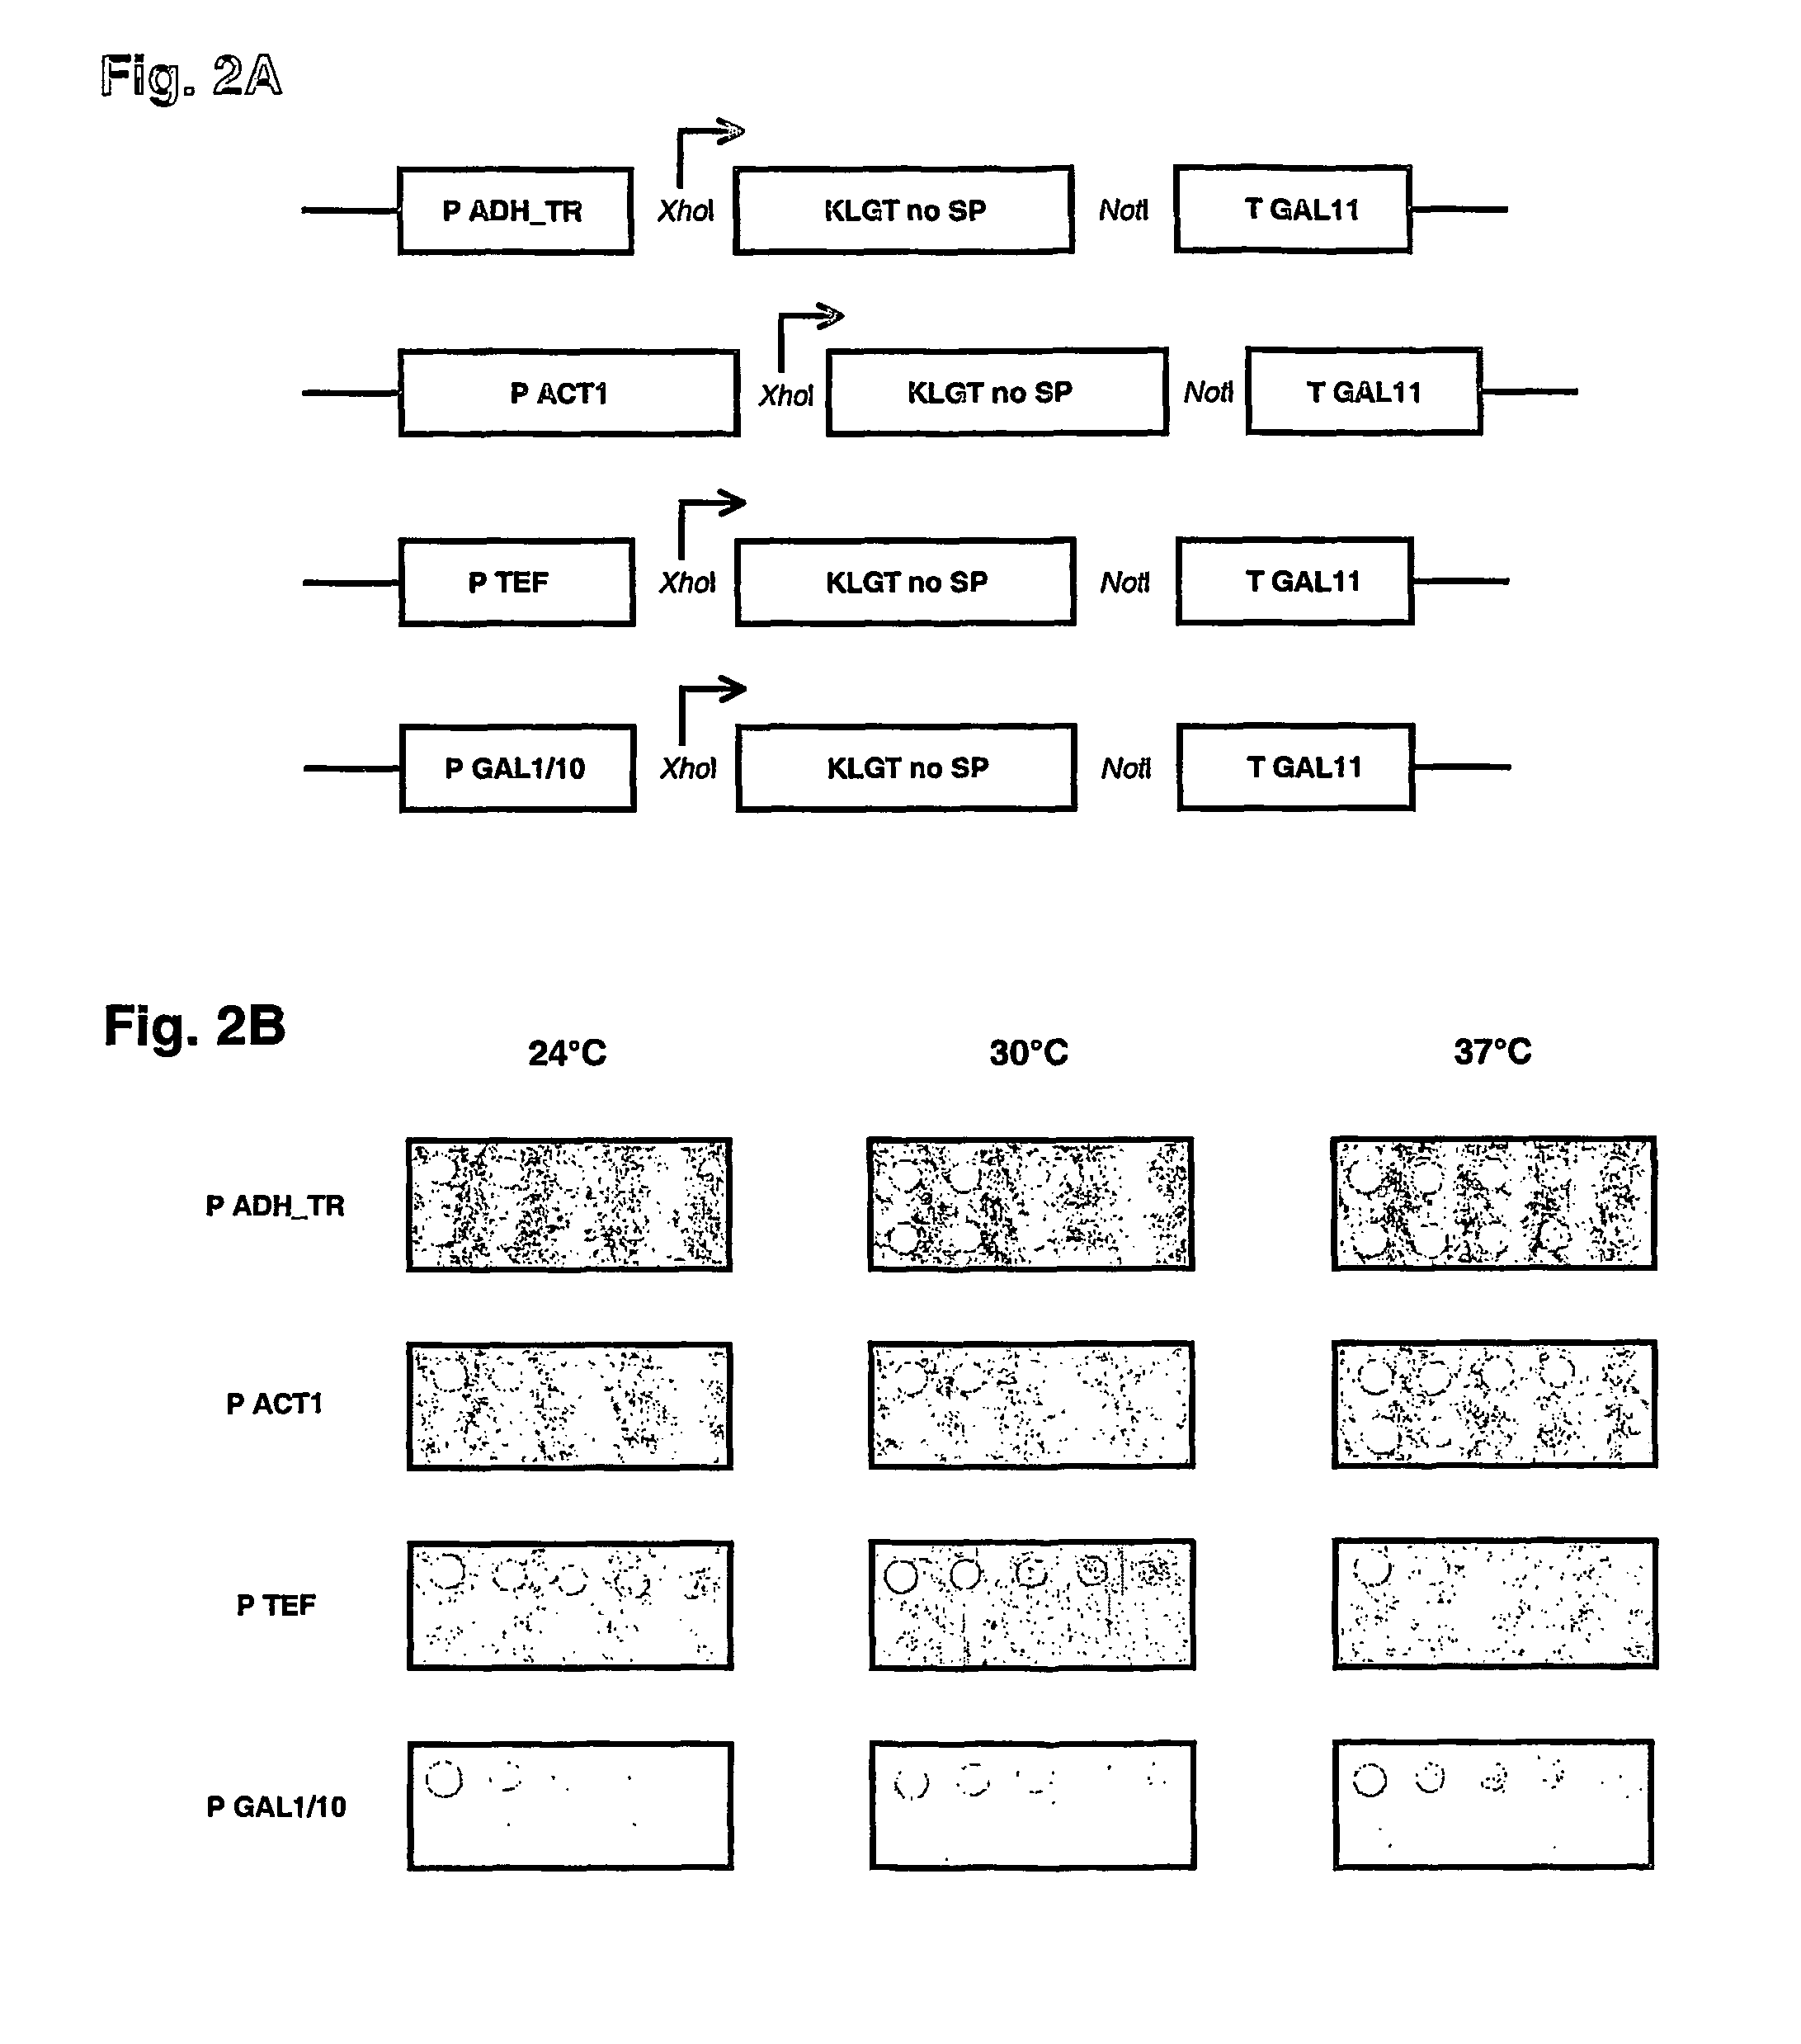 Method for the construction of randomized gene sequence libraries in cells